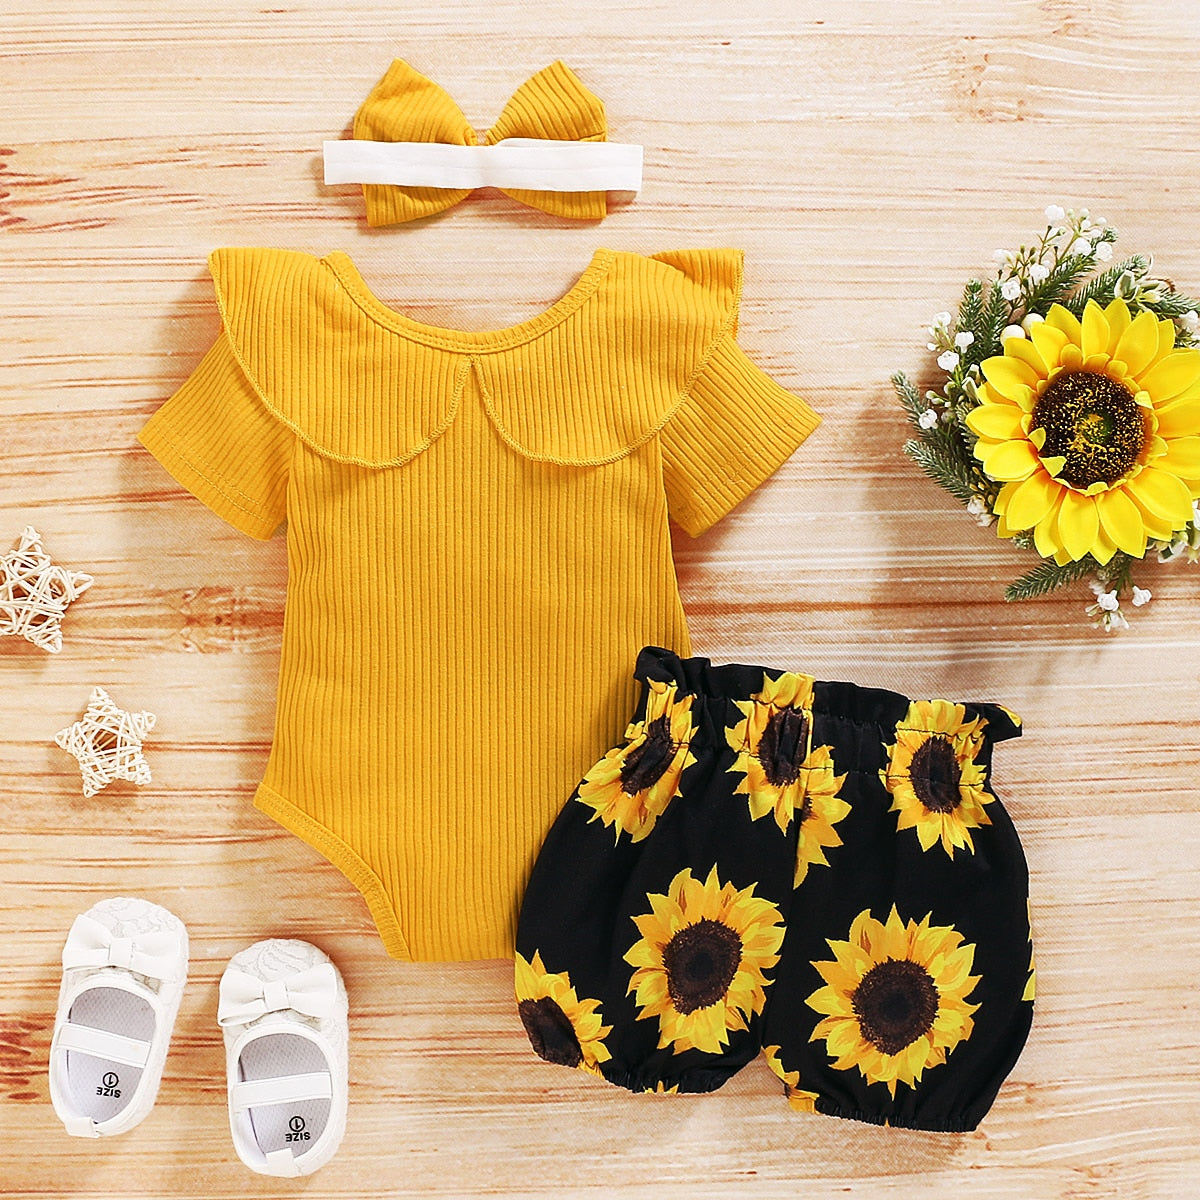 Newborn Infant Baby Clothing Set Short Sleeve Romper Top Sunflower Printed Shorts 3Pcs Outfit